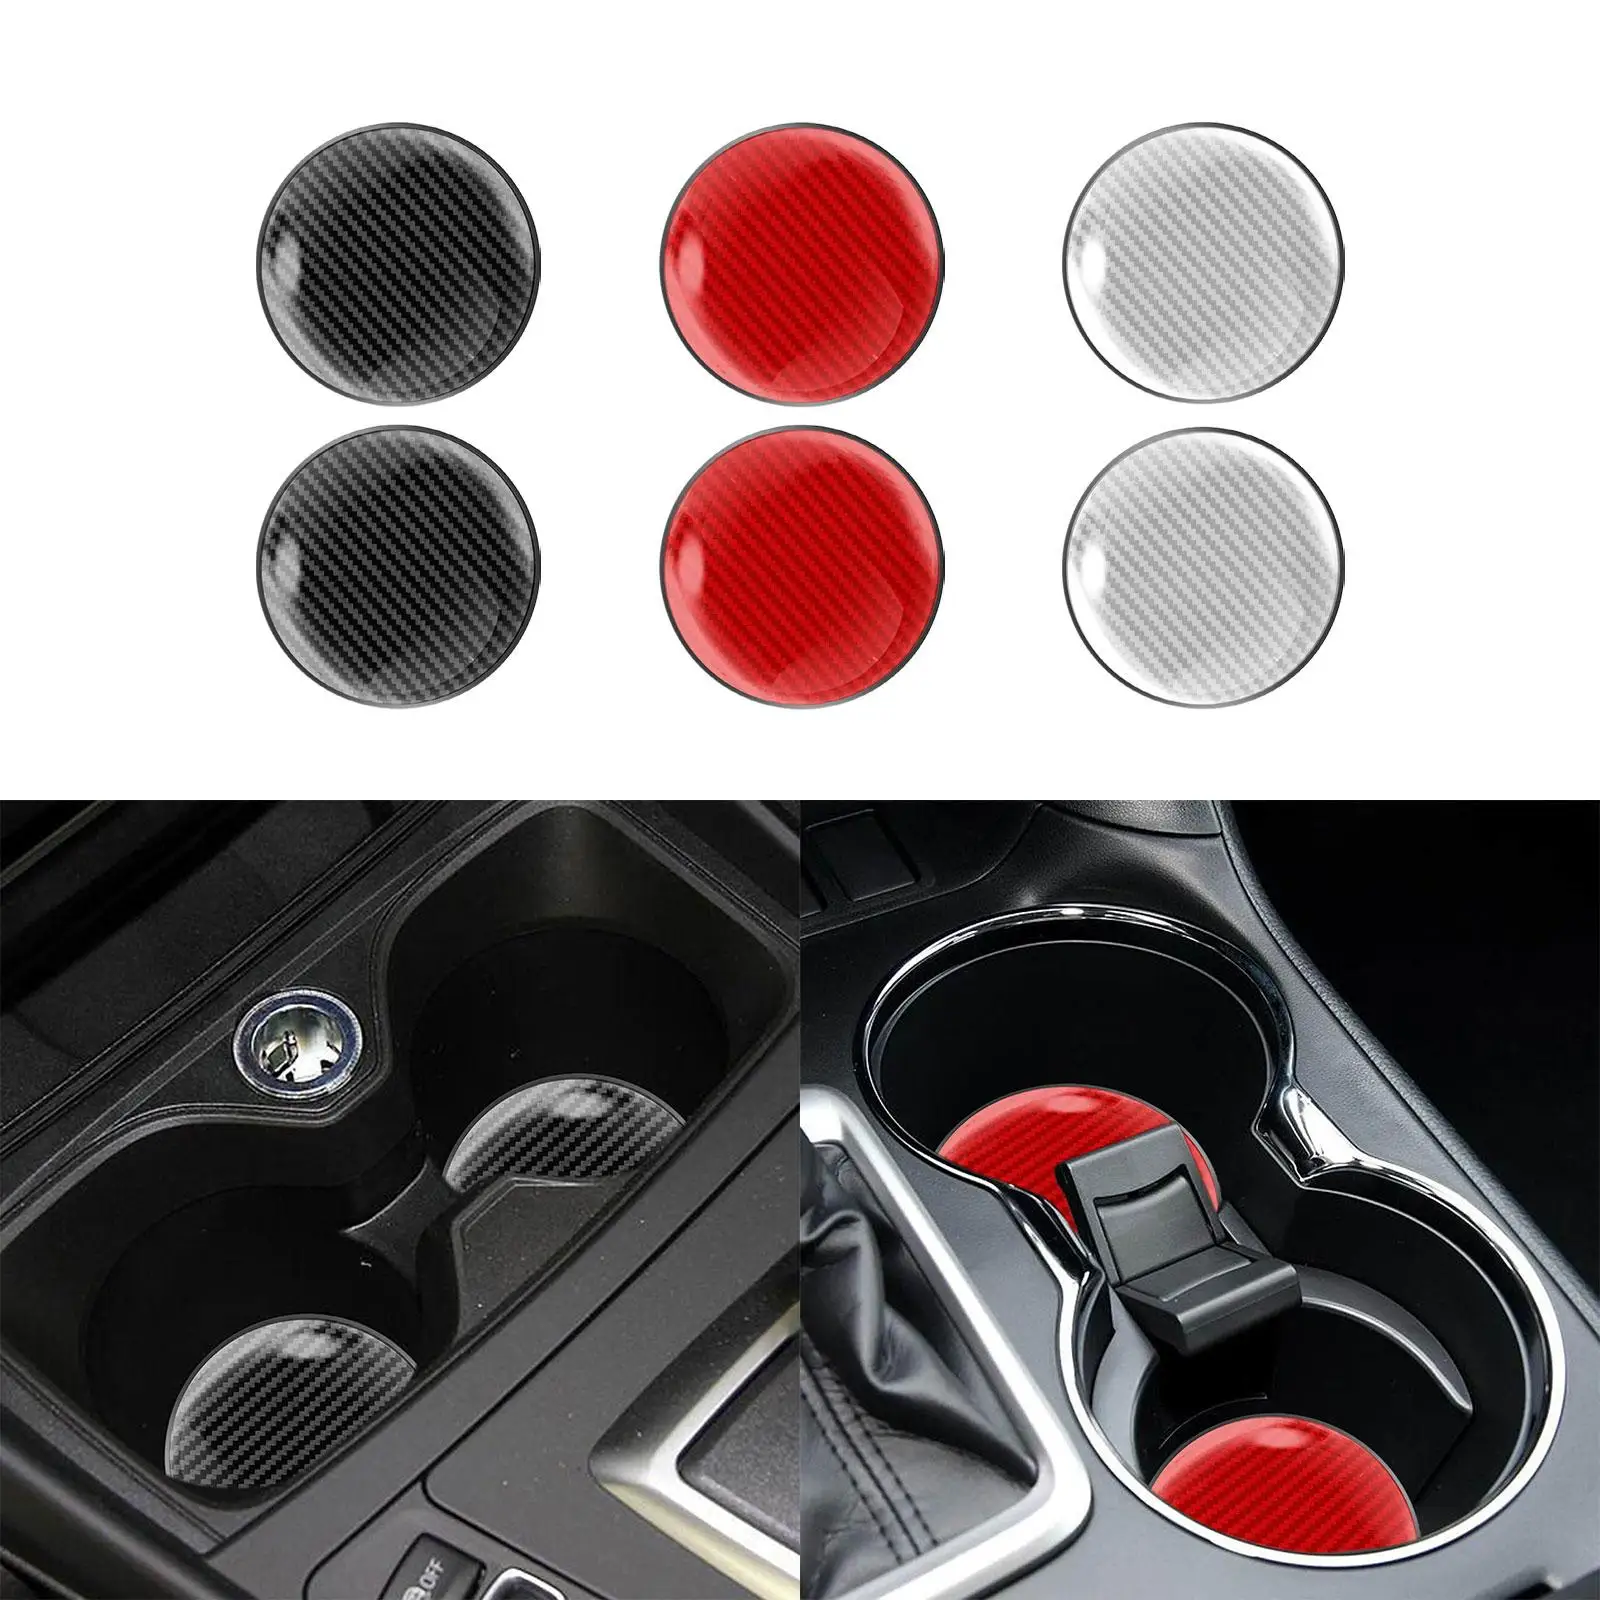 2 Pieces Cup Holder Coaster Universal Shockproof Waterproof Water Cup Coasters Slot Drink Mat for Travel Outdoor Driving